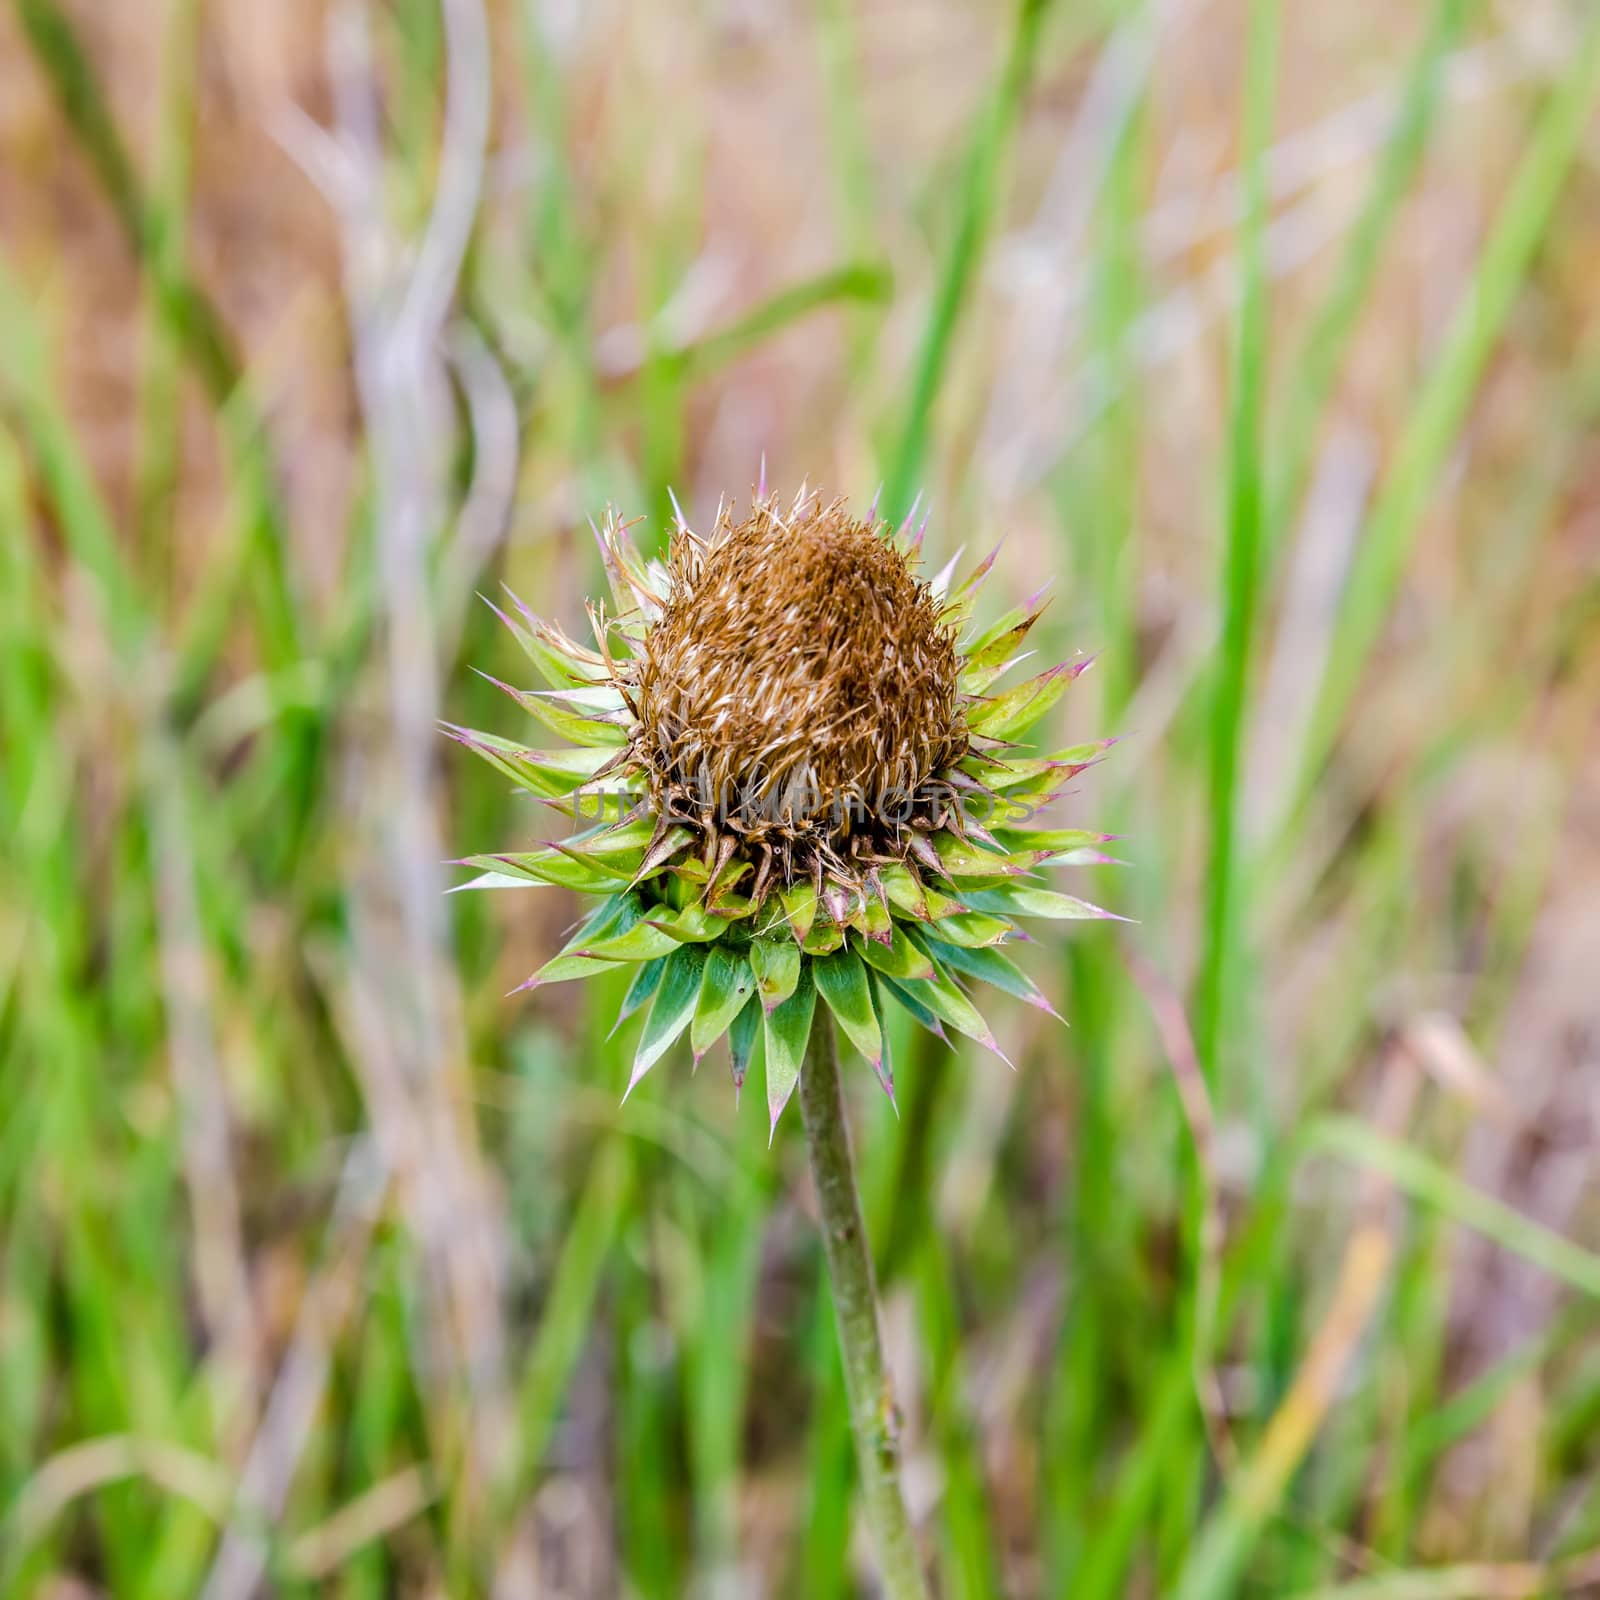 Thistle flower in the meadows. Onopordum Acanthium. Spiky plant in wild